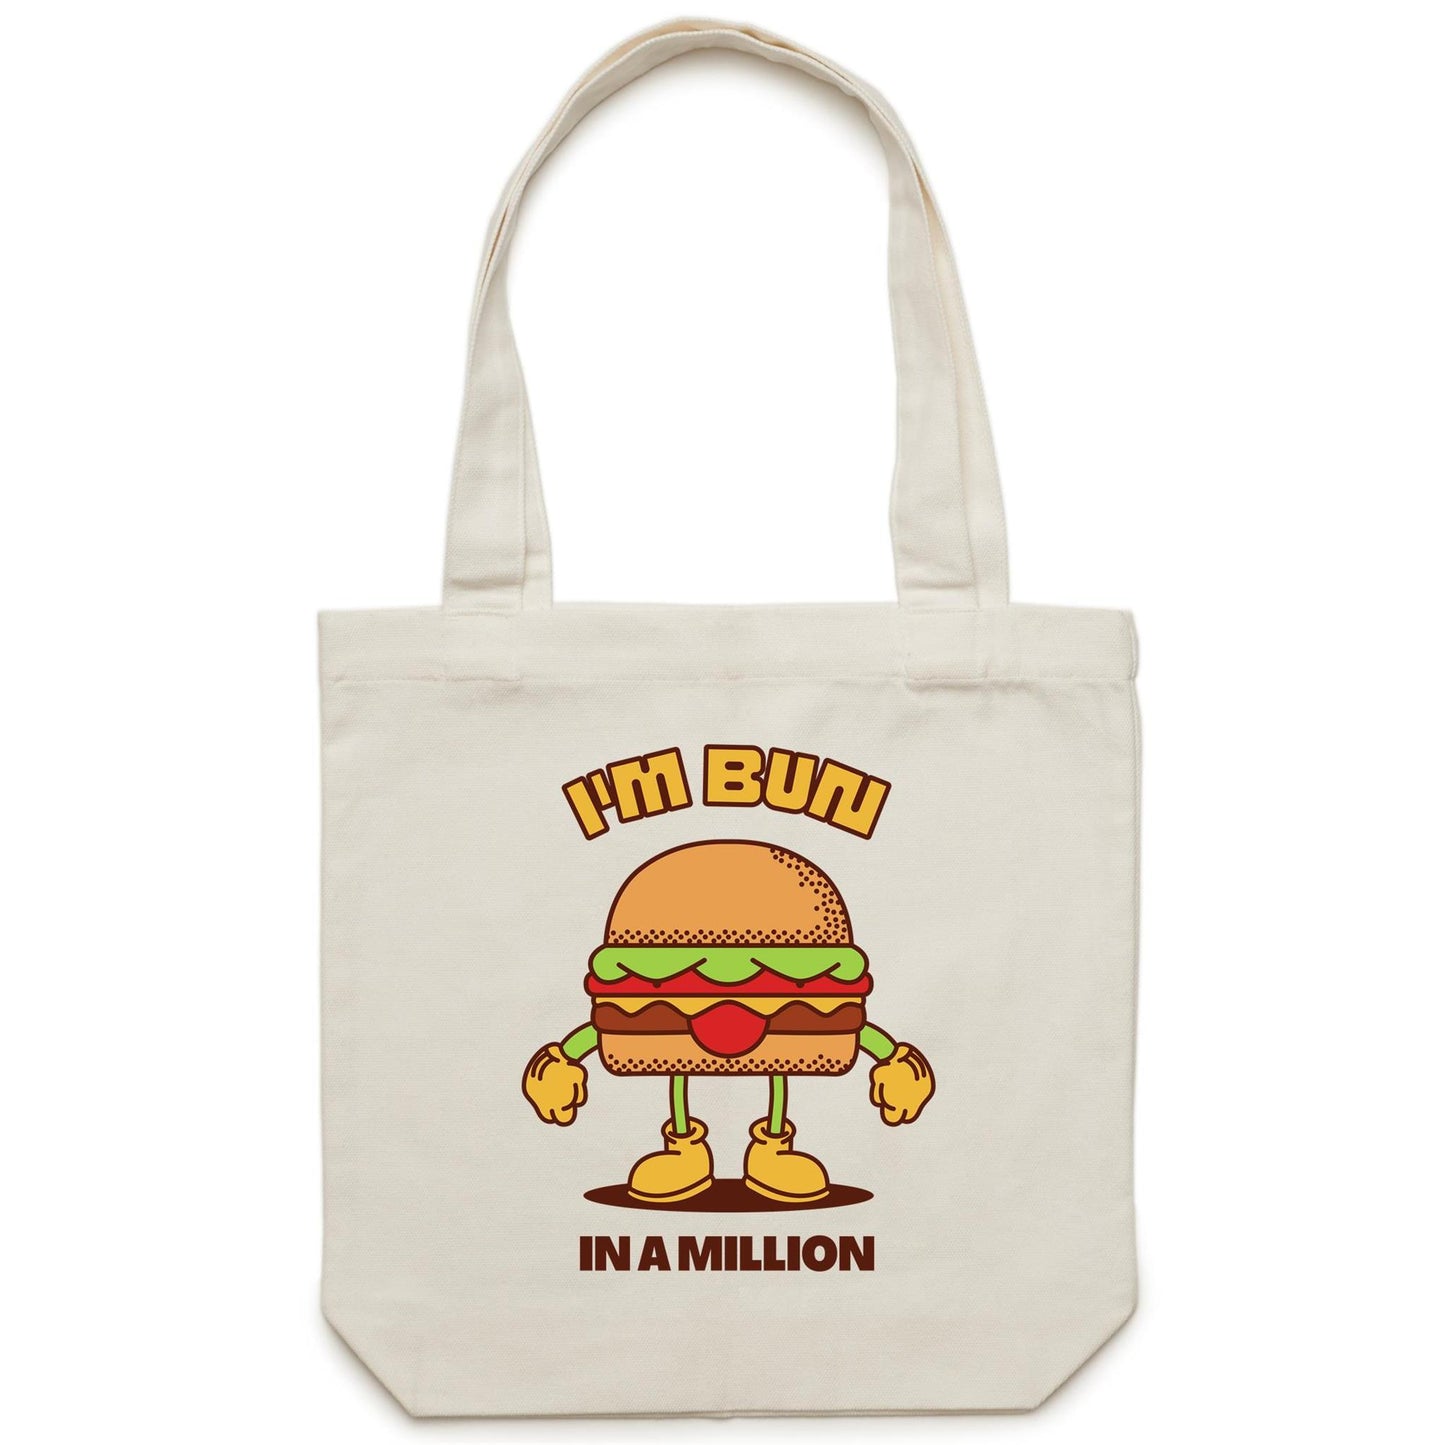 I'm Bun In A Million - Canvas Tote Bag Default Title Tote Bag Food Funny